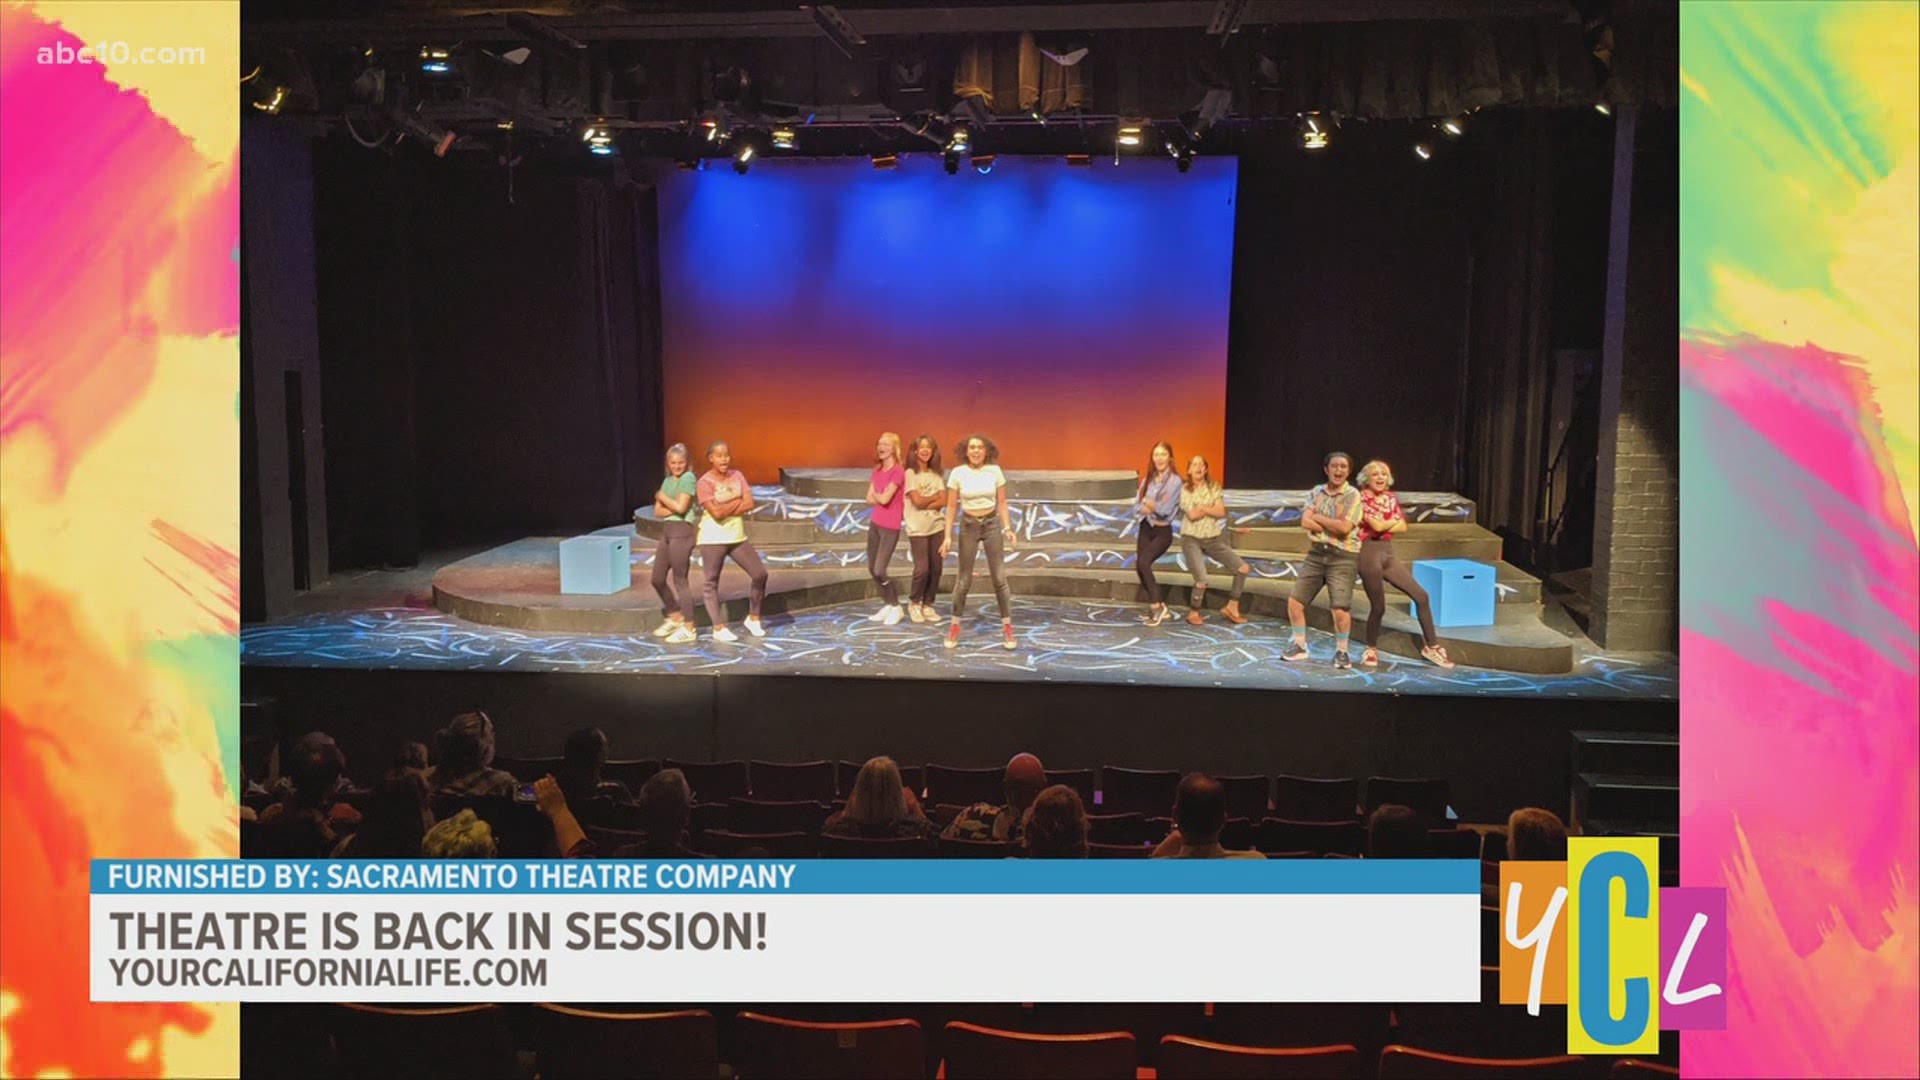 Theatre is back in session at the Sacramento Theatre Company. We hear more on the kid and adult acting classes they're offering this year.